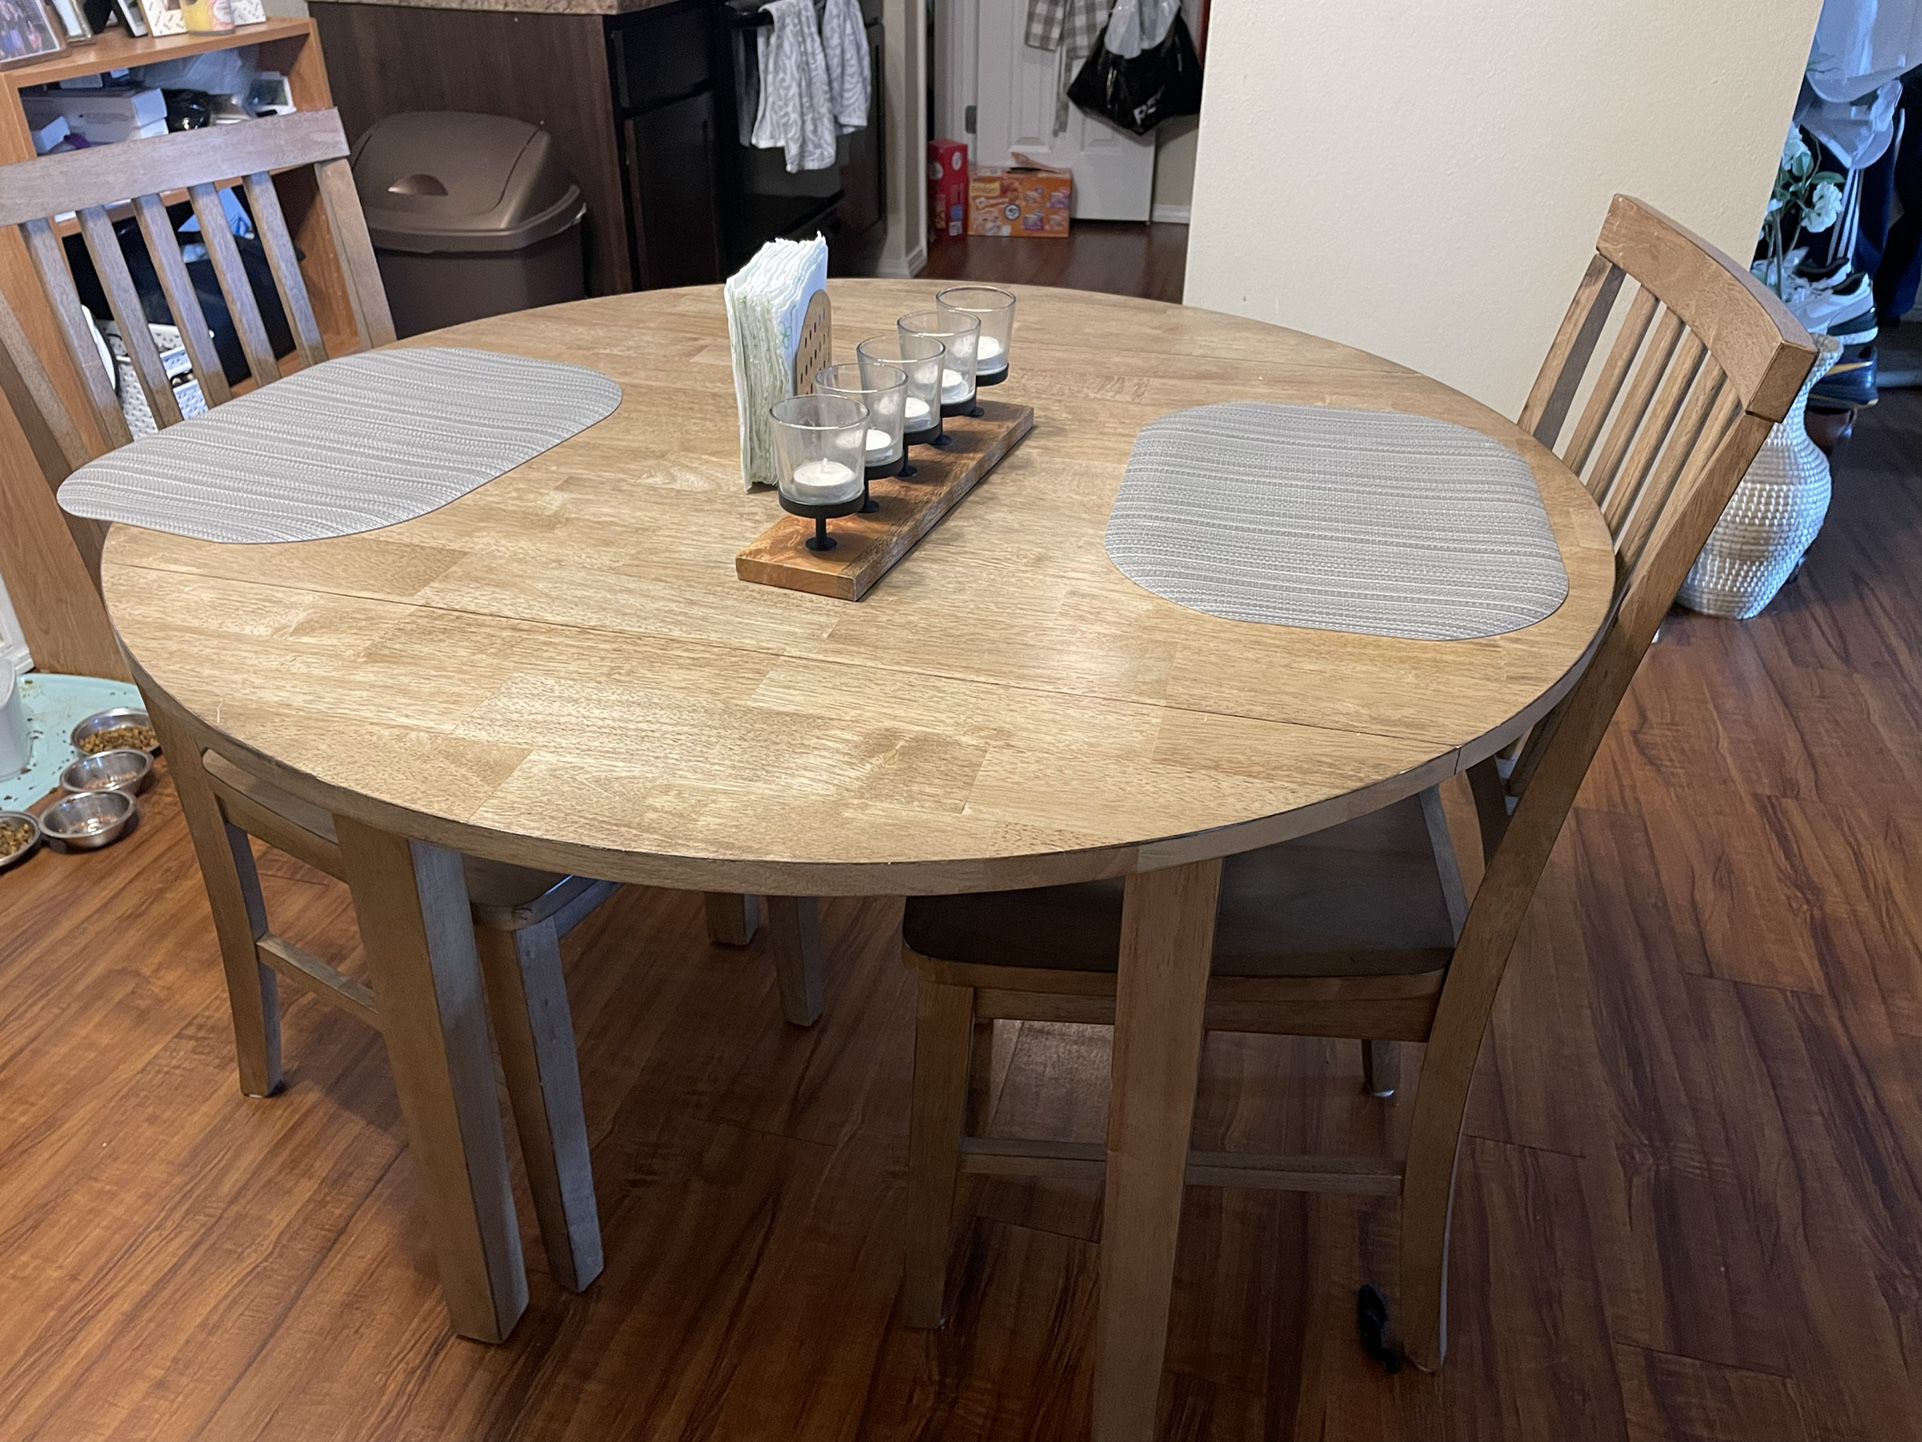 Dining Table OBO